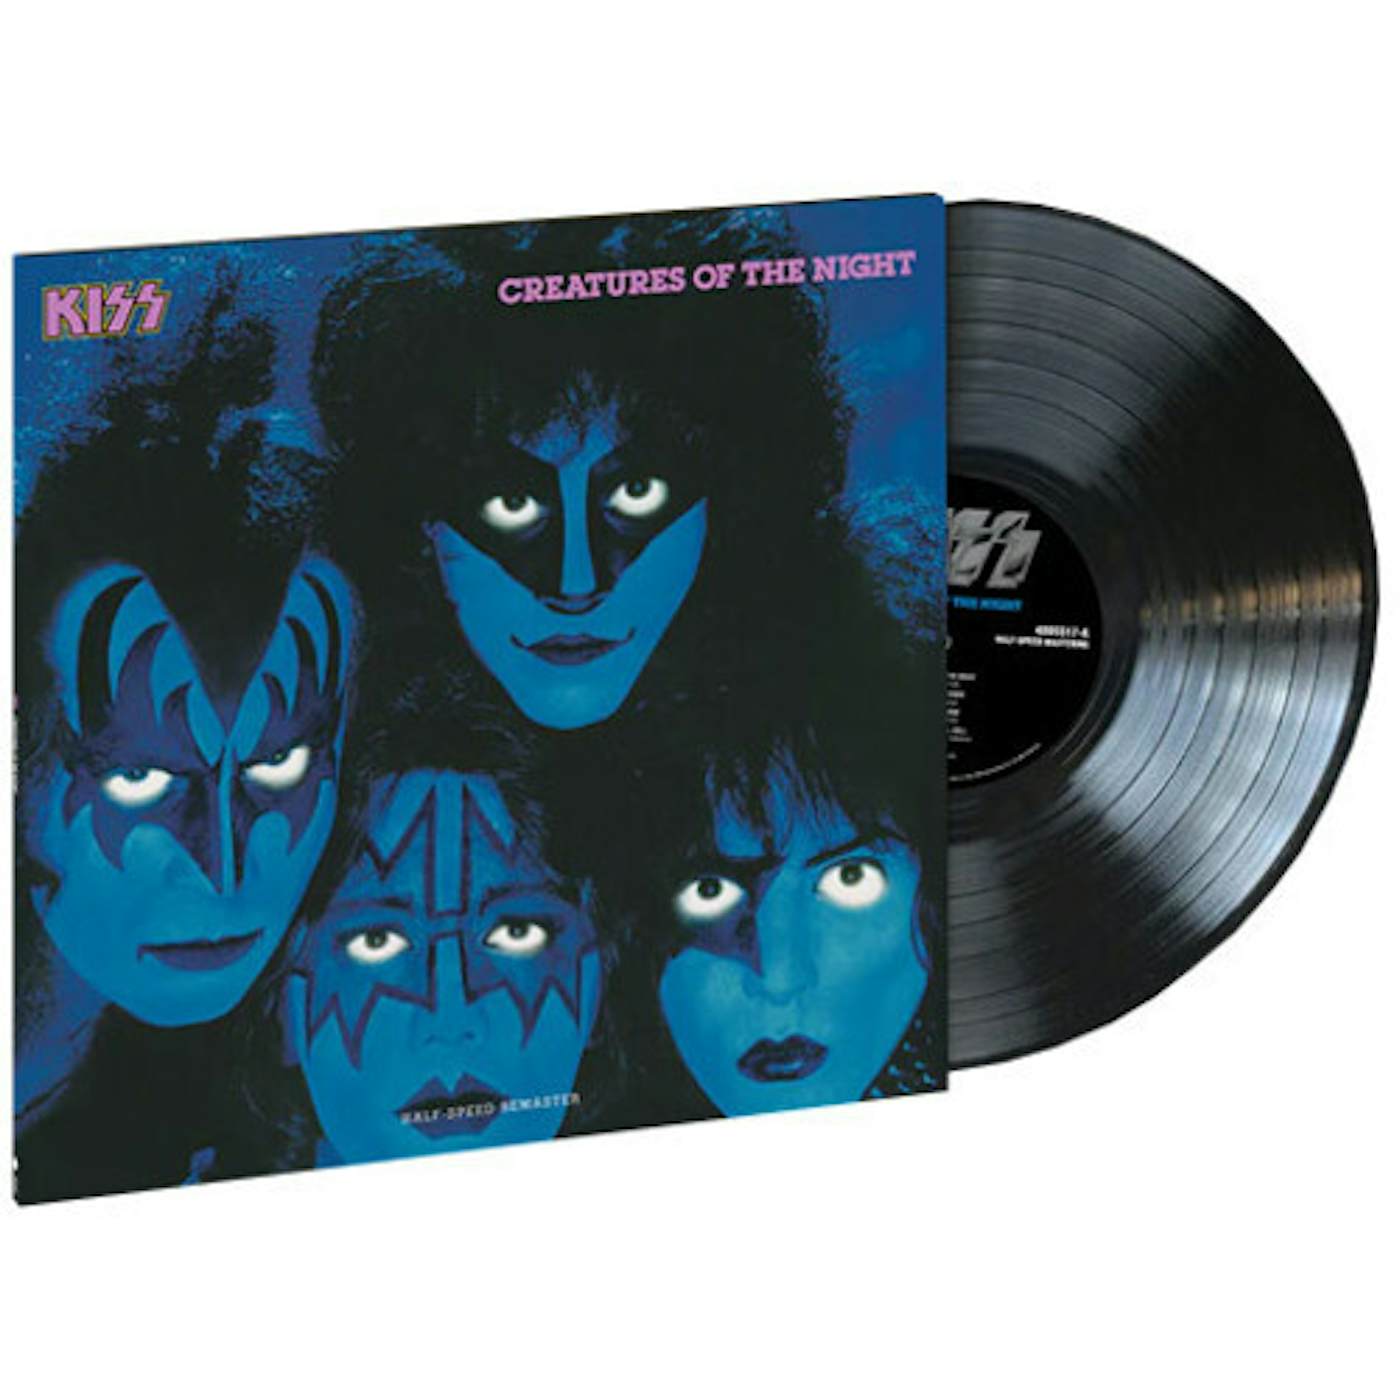 KISS Creatures Of The Night (40th Anniversary) Vinyl Record